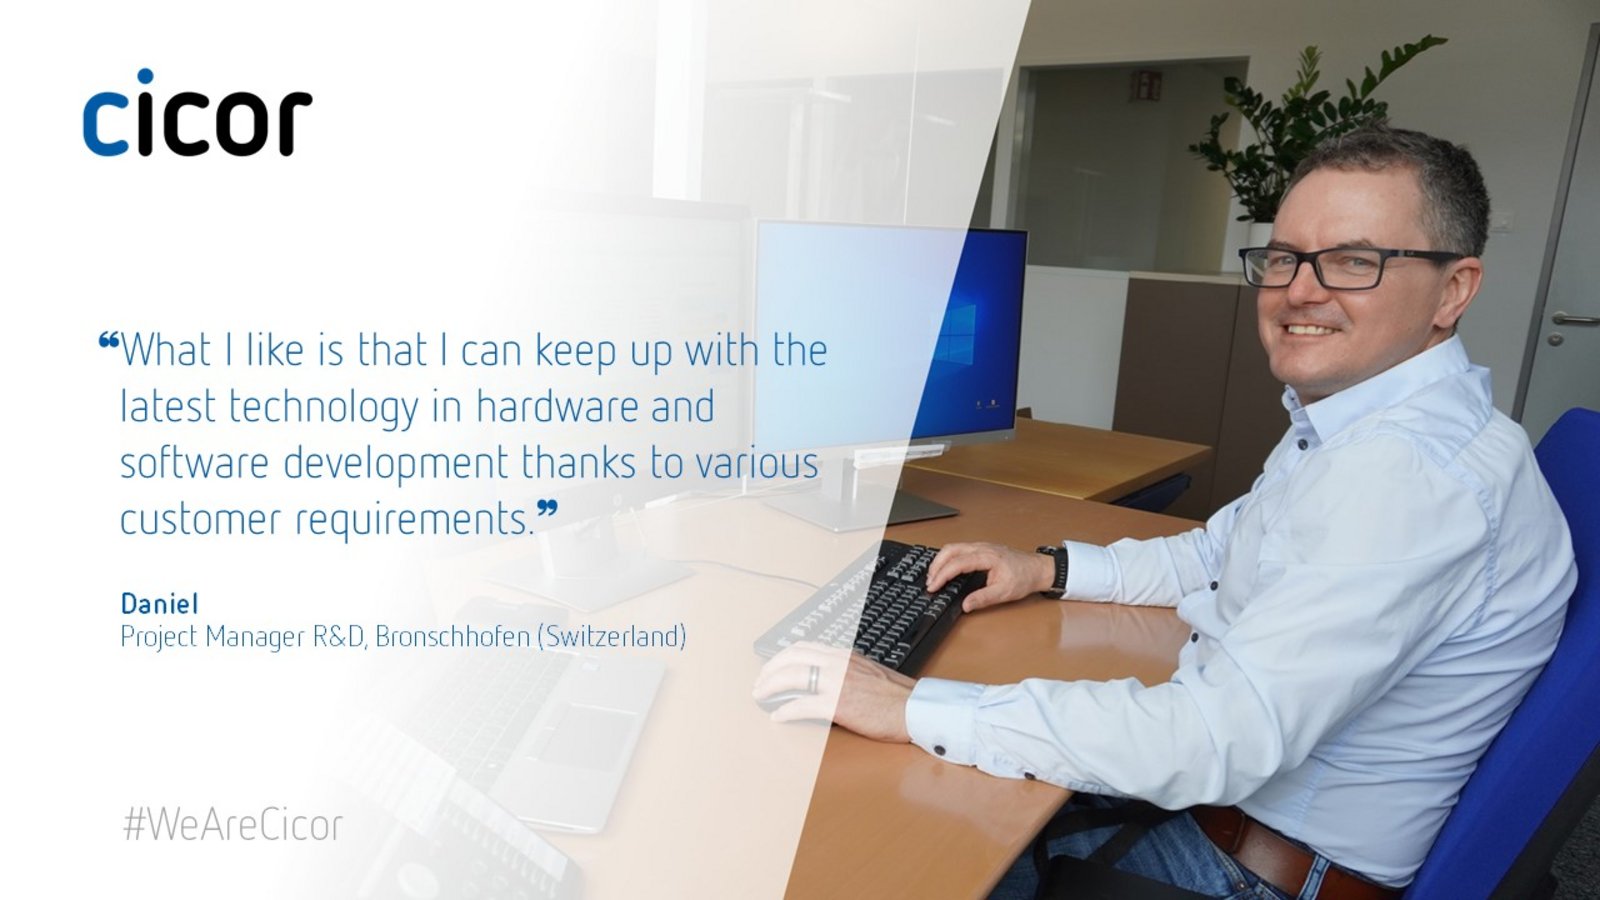 Testimonial of Daniel who works at the Cicor site in Bronschhofen